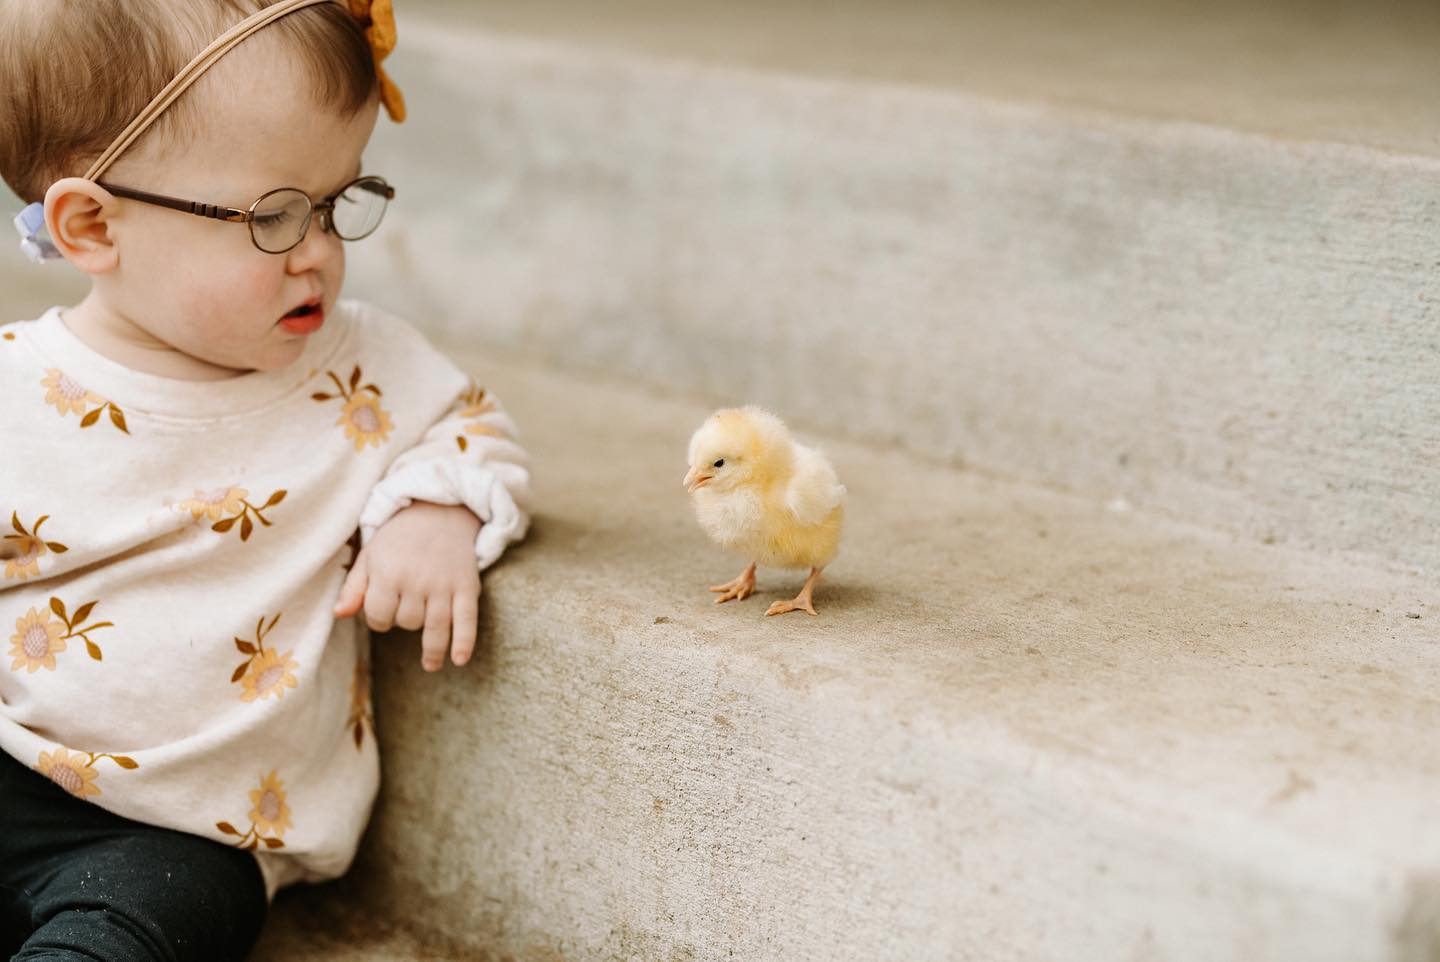 A young girl sits next to a baby chicken